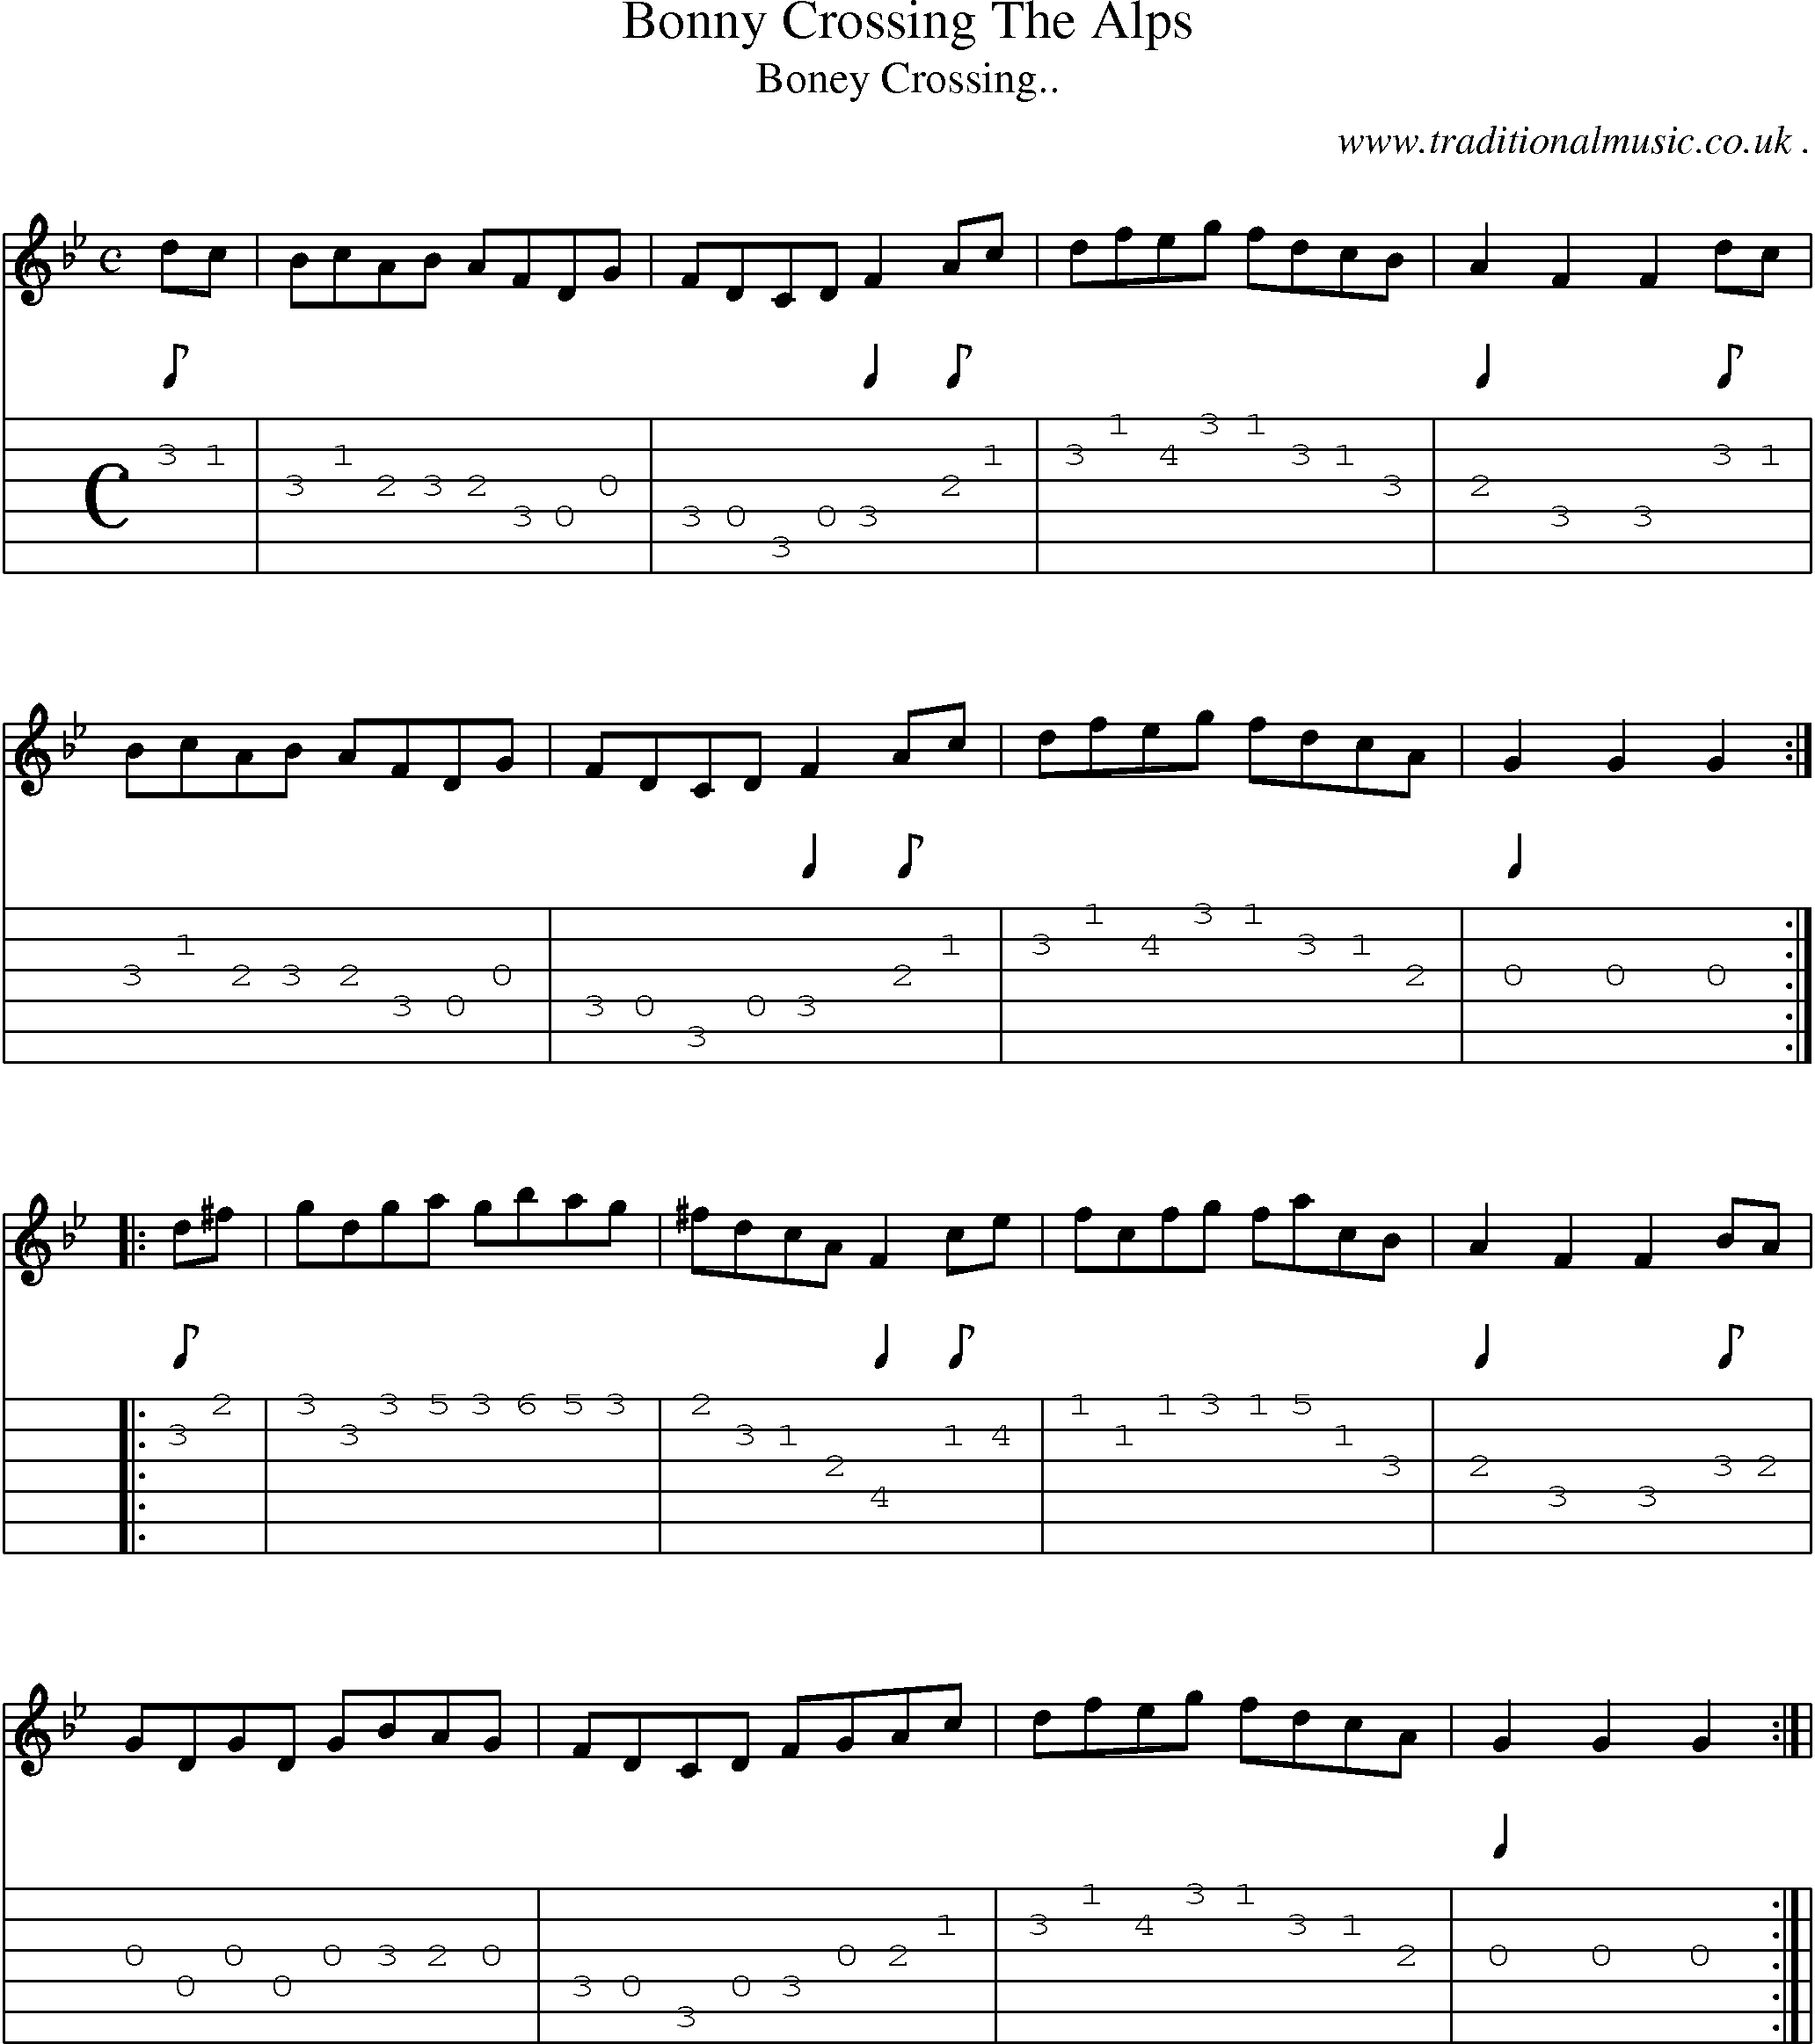 Sheet-Music and Guitar Tabs for Bonny Crossing The Alps